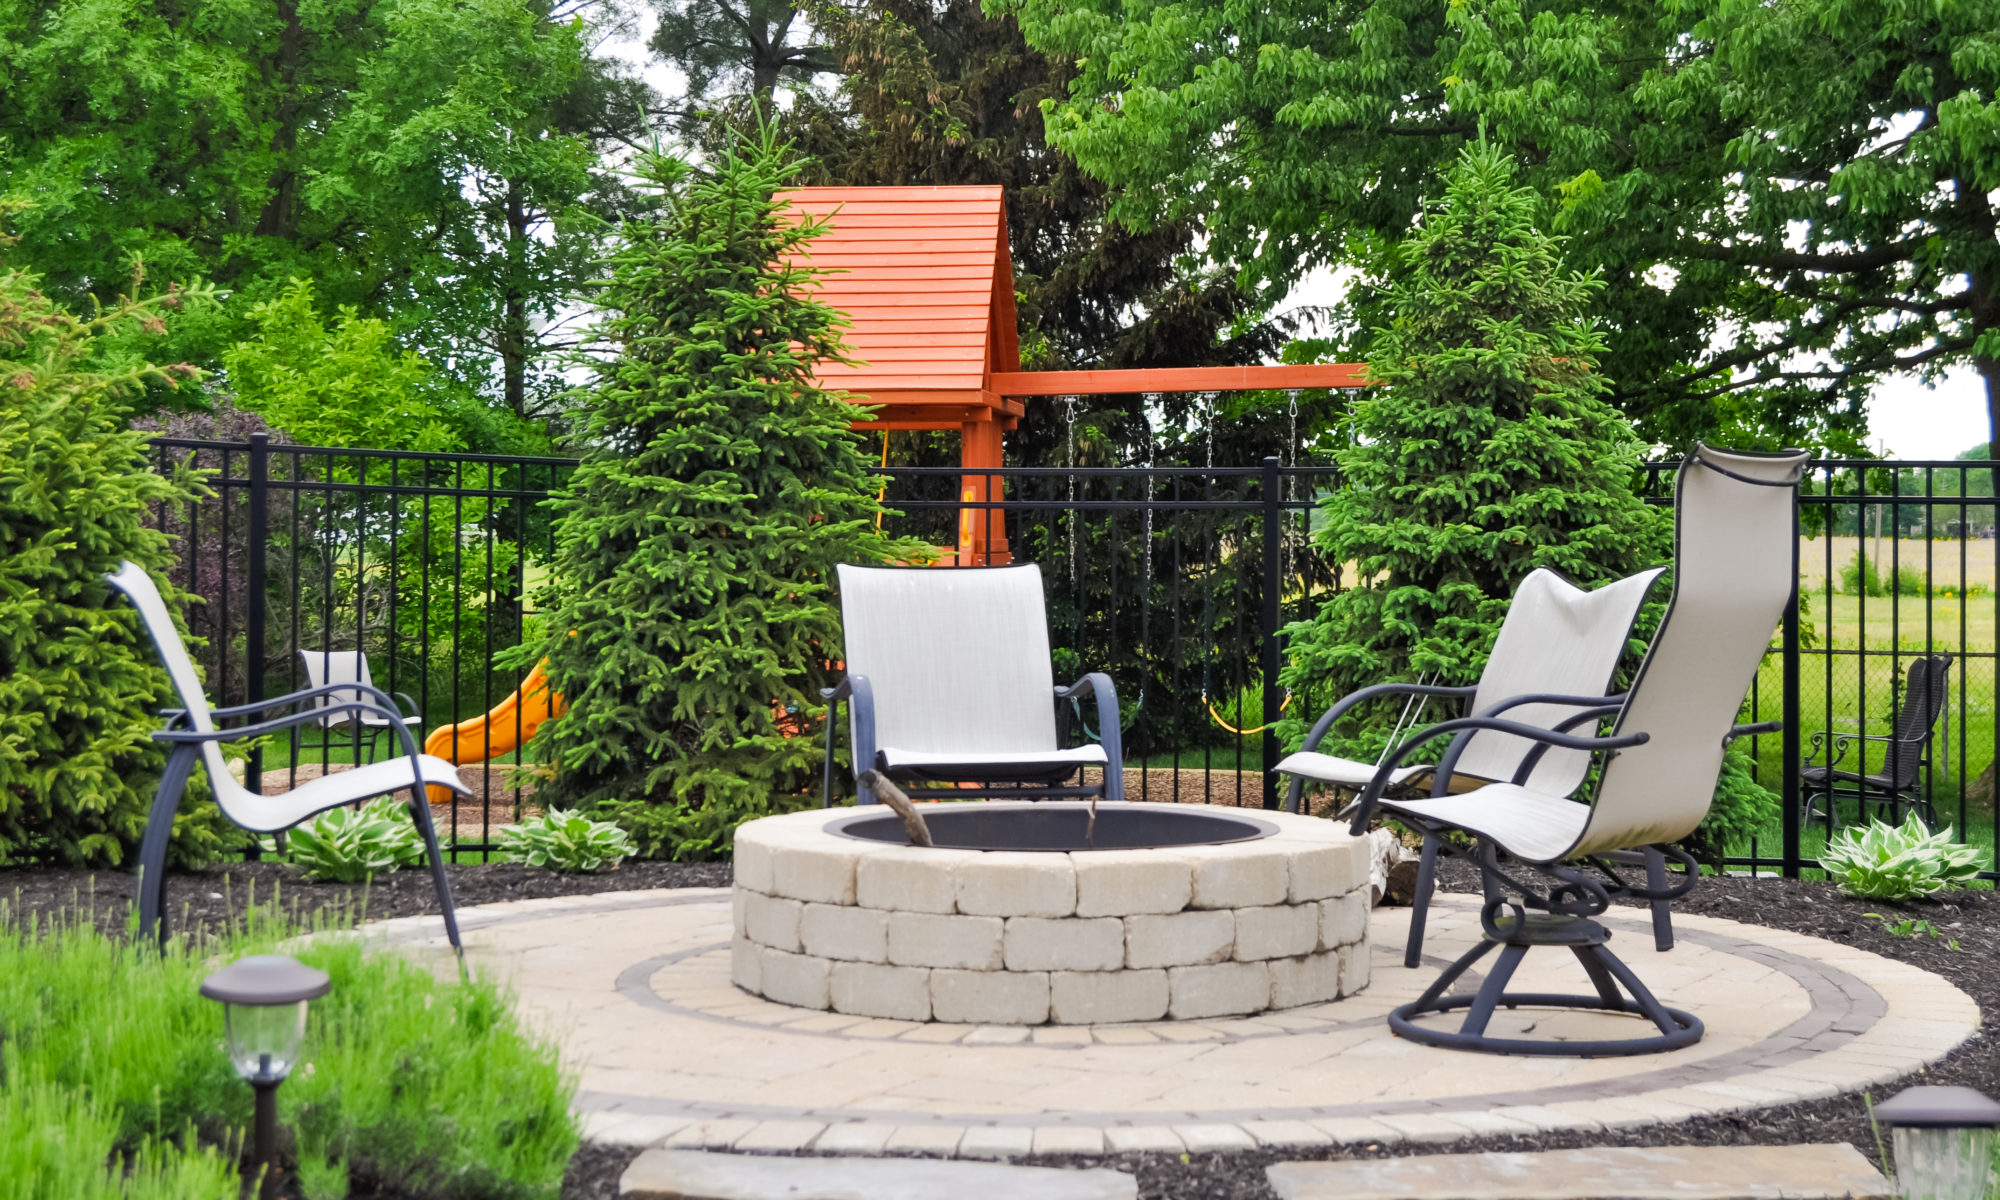 Precision Outdoors Franklin Township Retaining Wall Fire Pit and Patio Travertine paver patio natural cooling slip resistant texture rebuild restoration blocks fire pit space stone walkway perimeter landscaping custom personal privacy pool are a playground pad build mulch installation entertaining Avon indiana